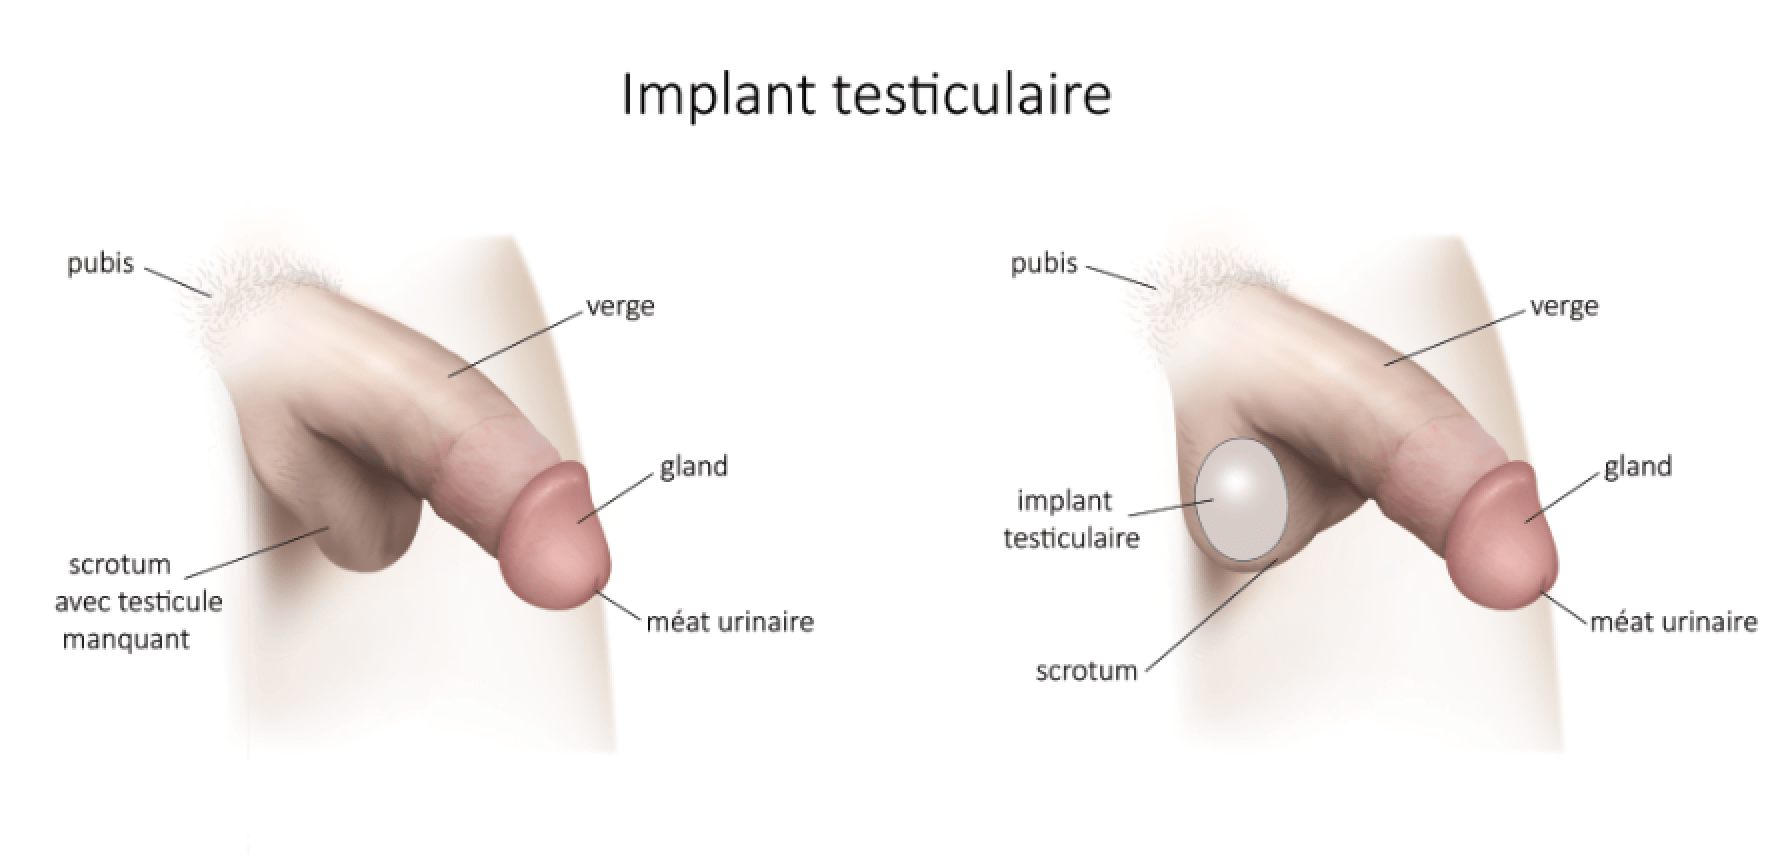 Implant testiculaire